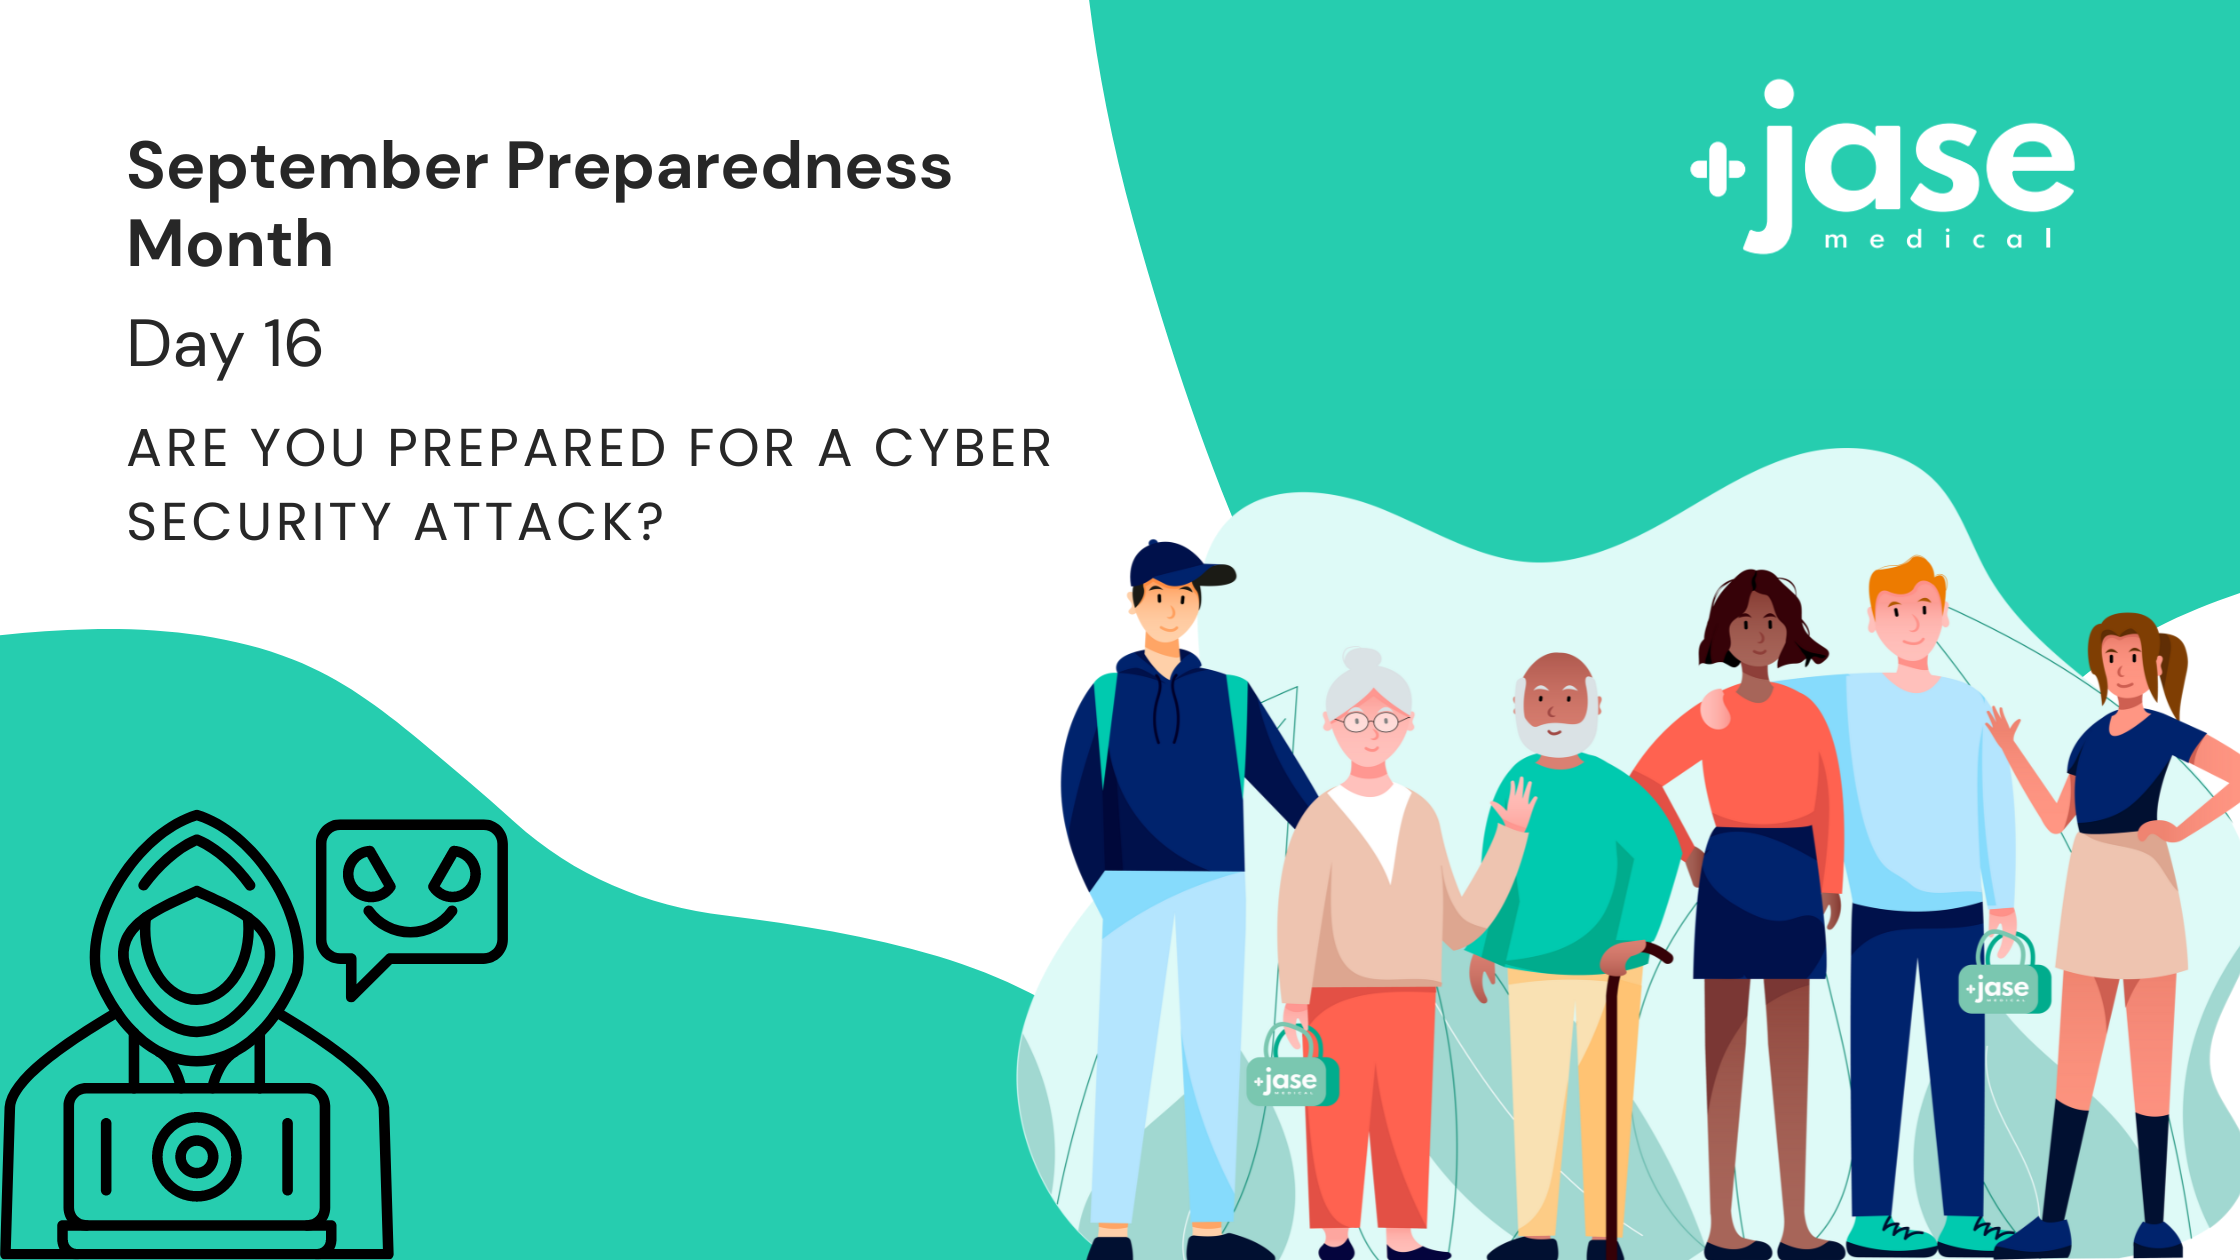 Are You Prepared For A Cyber Security Attack?